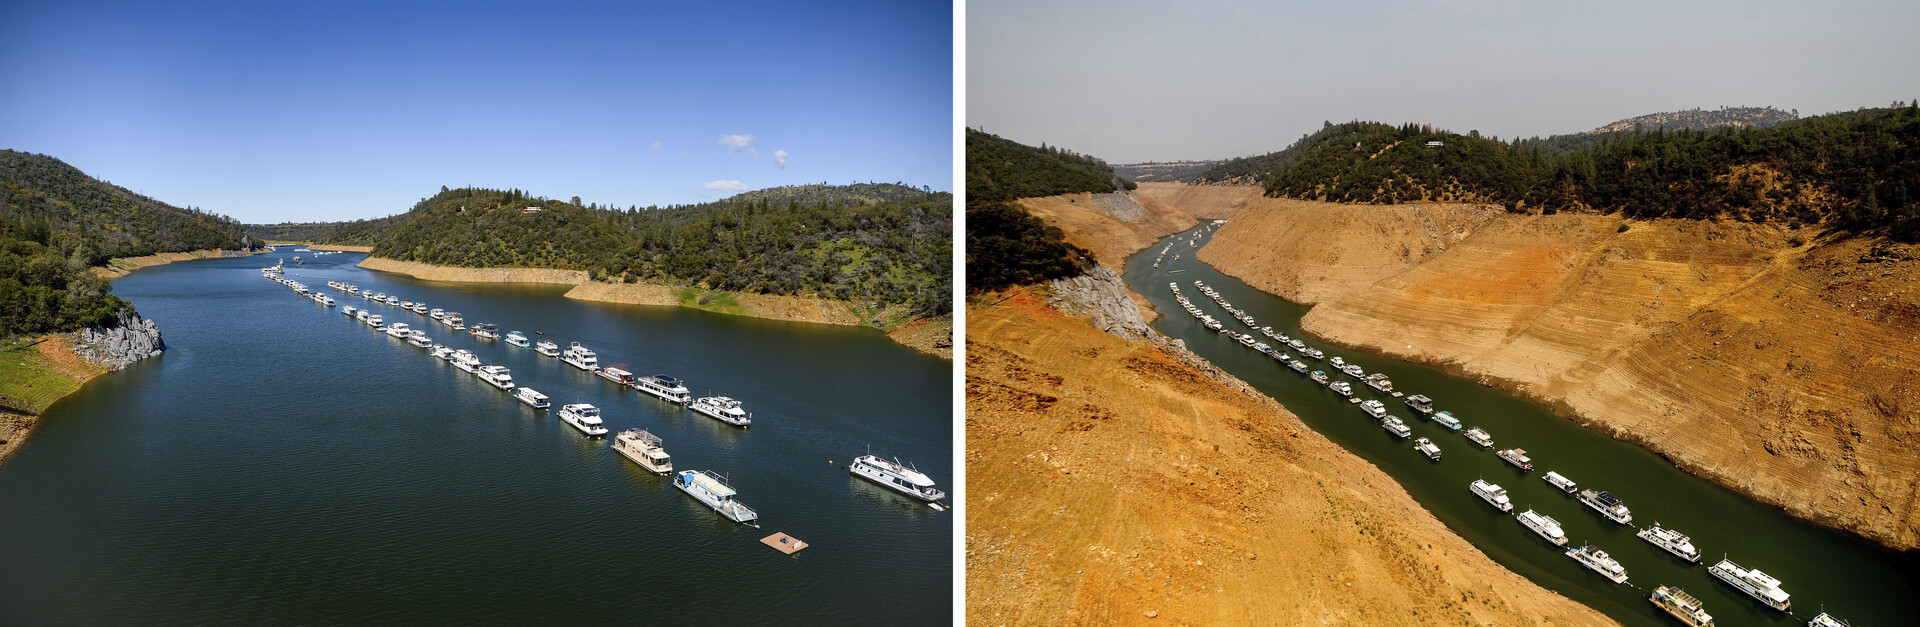 The photo on the left shows boats surrounded by water, while the photo on the right shows little water in Lake Oroville.